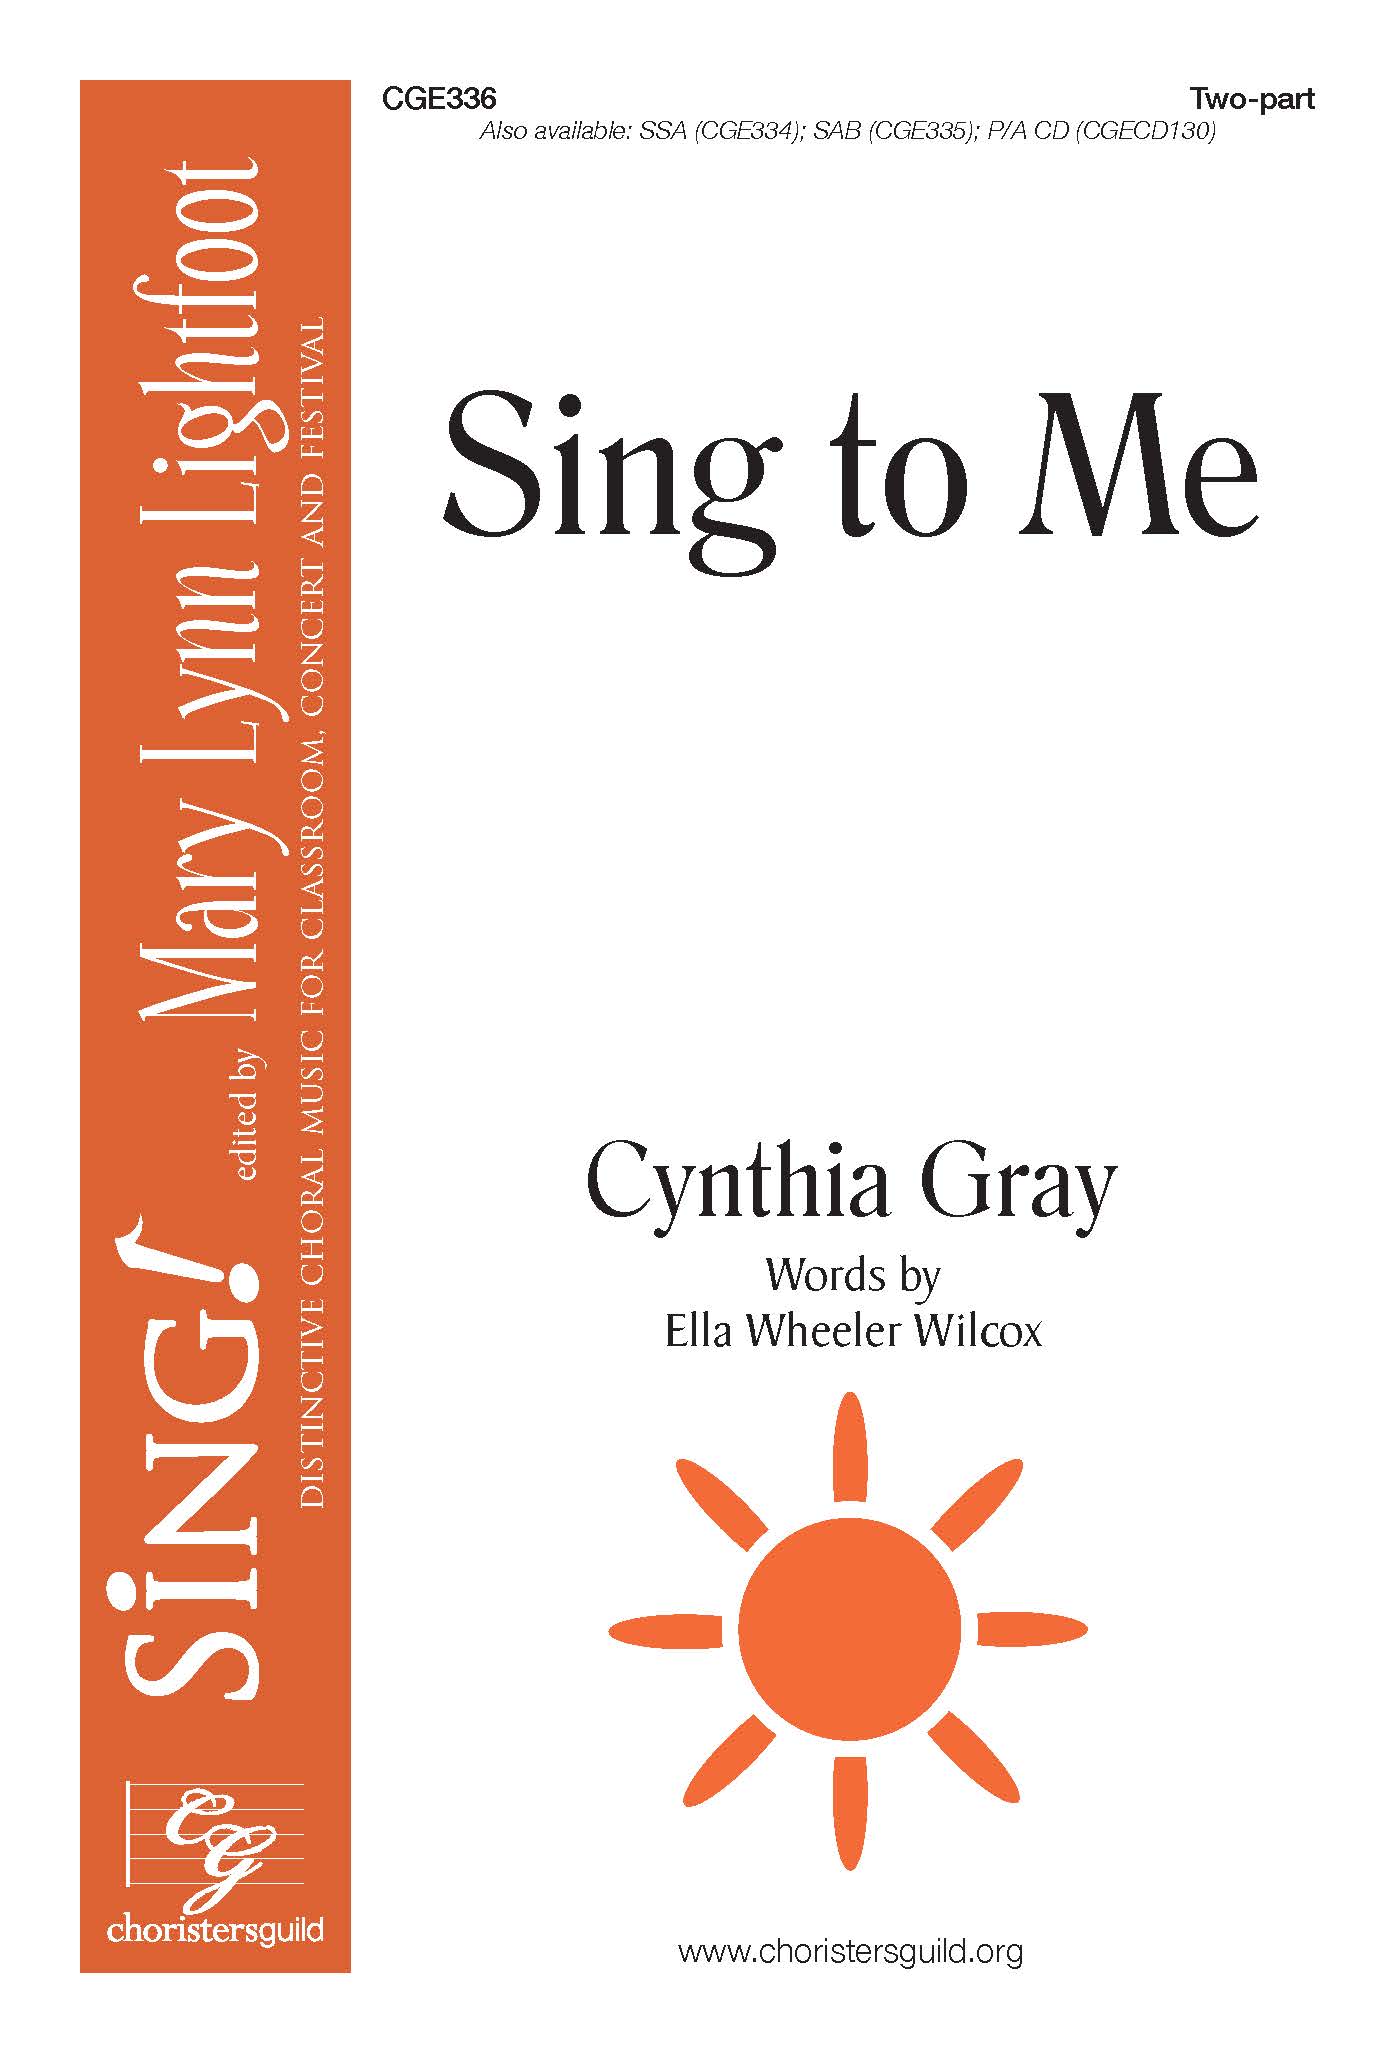 Sing to Me - Two-part